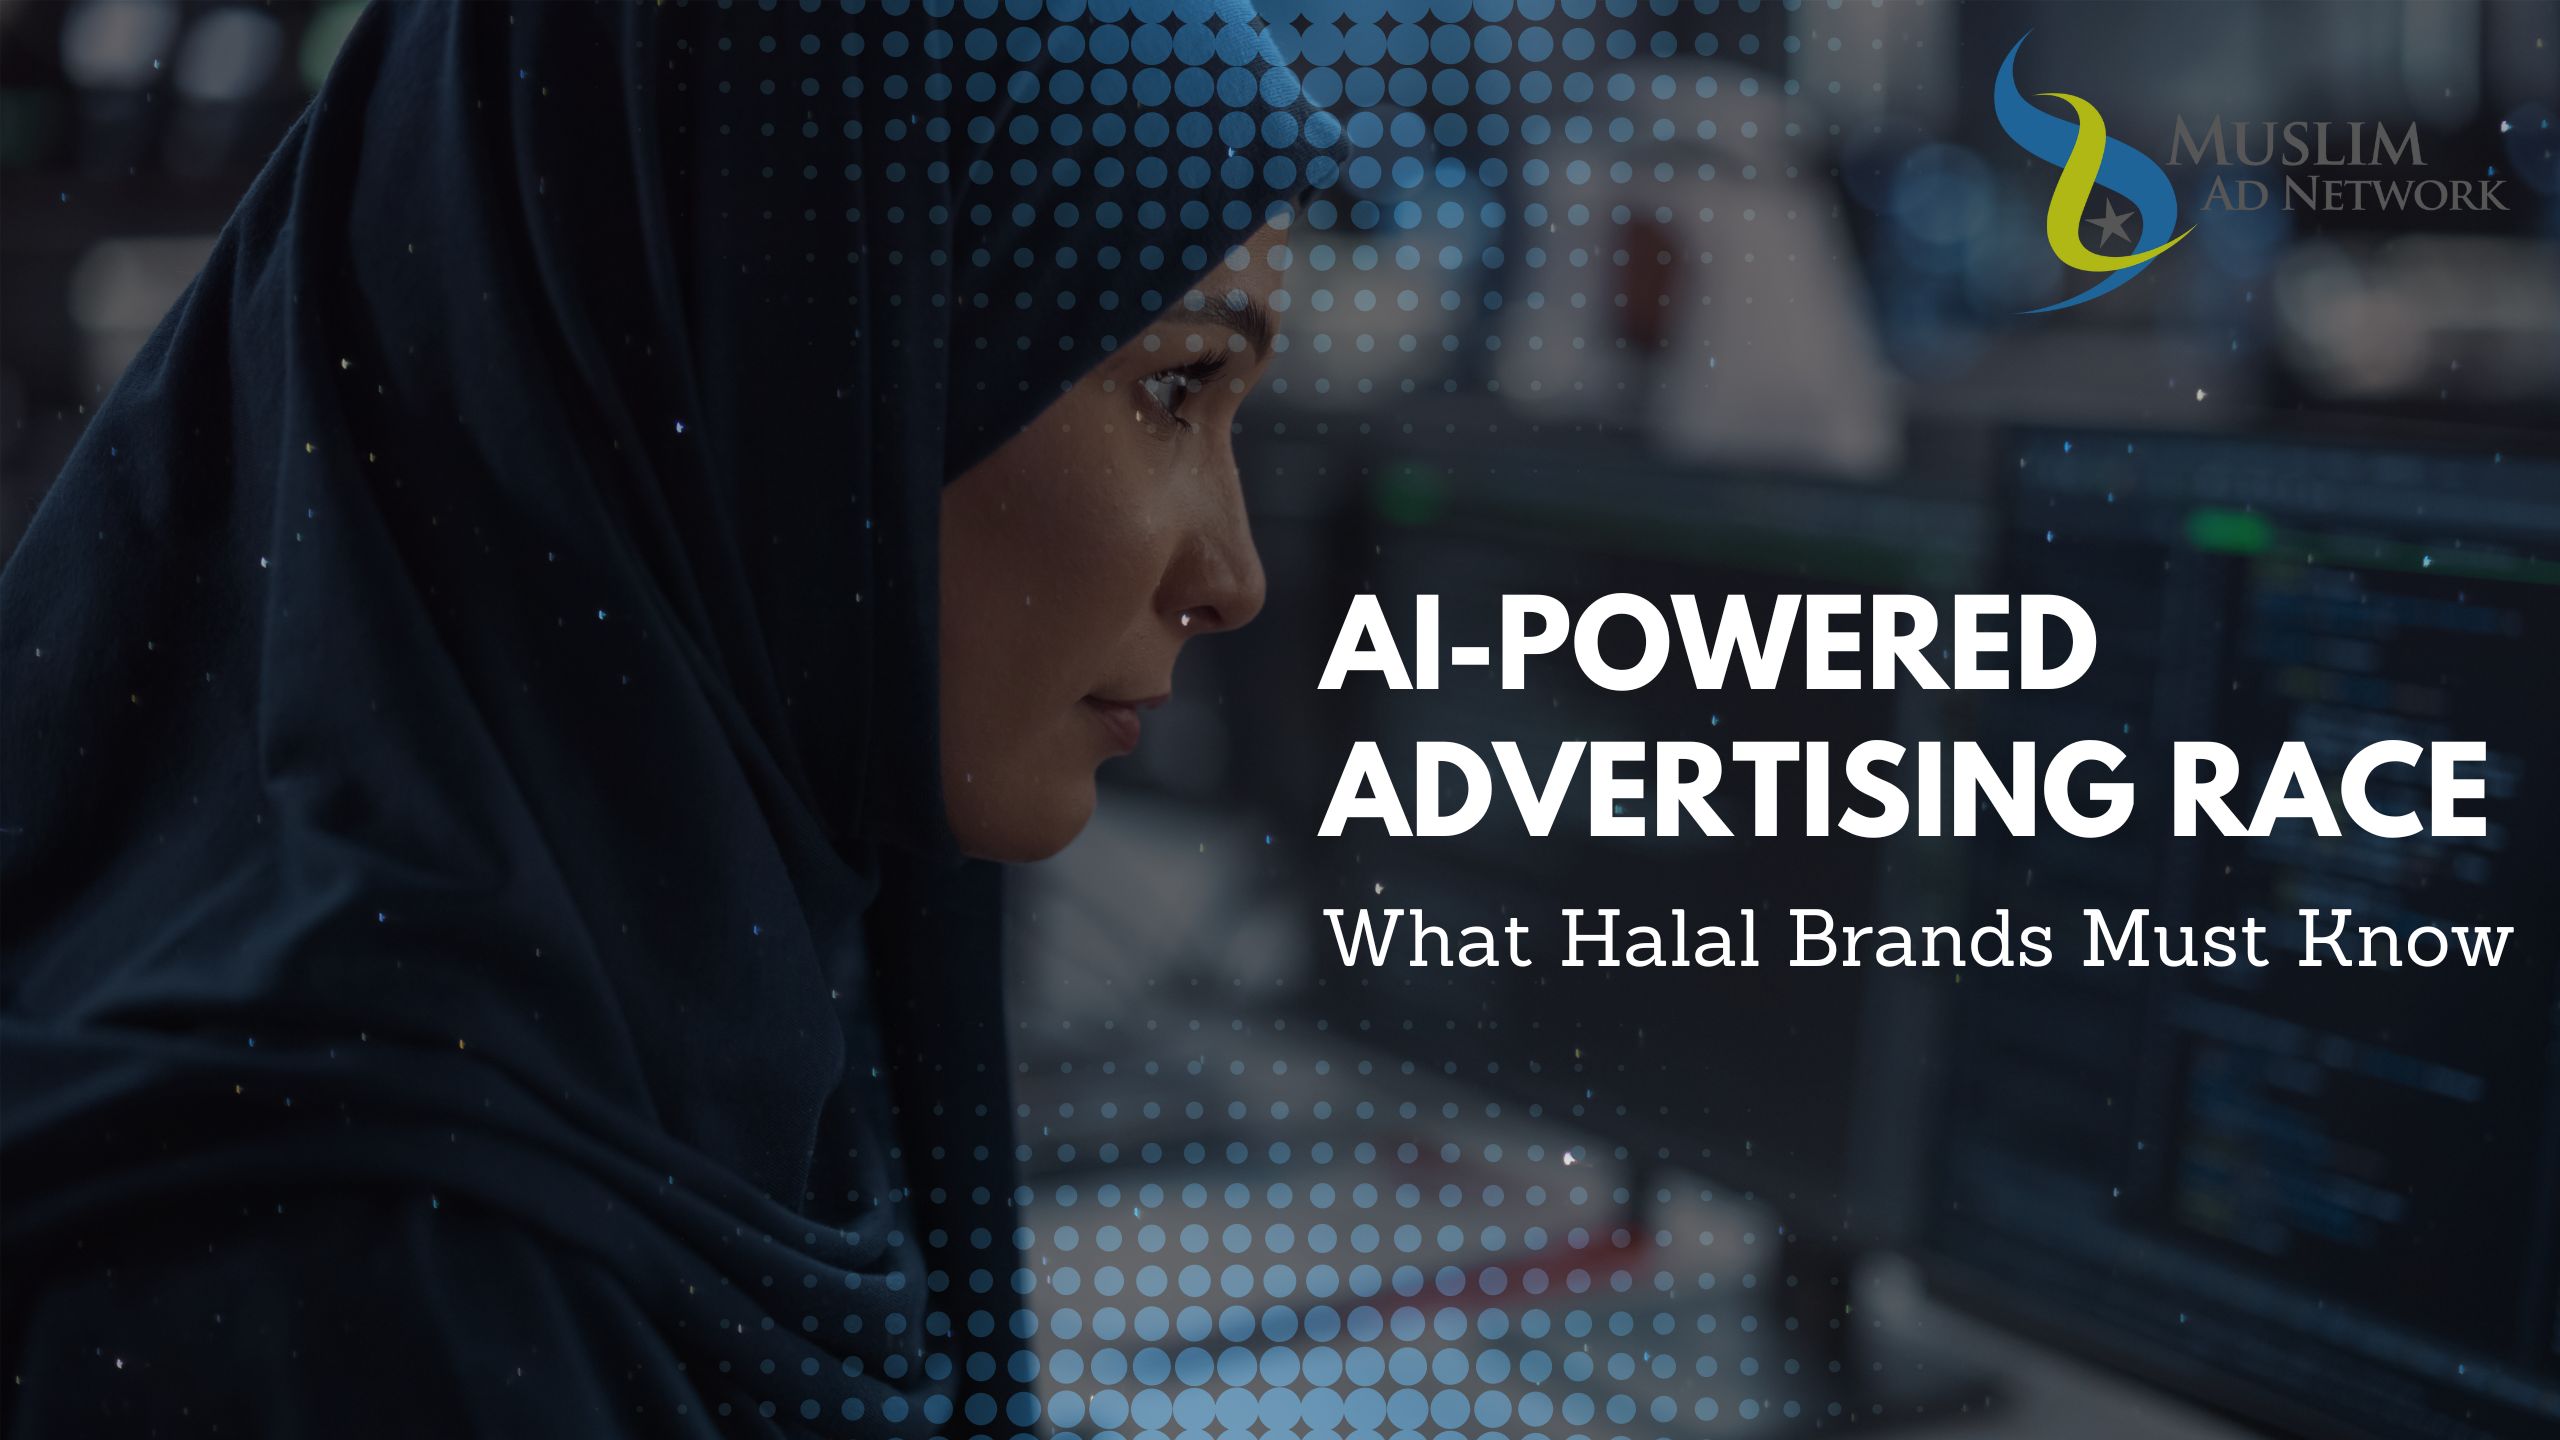 What Halal Brands Must Know About the AI-Powered Advertising Race